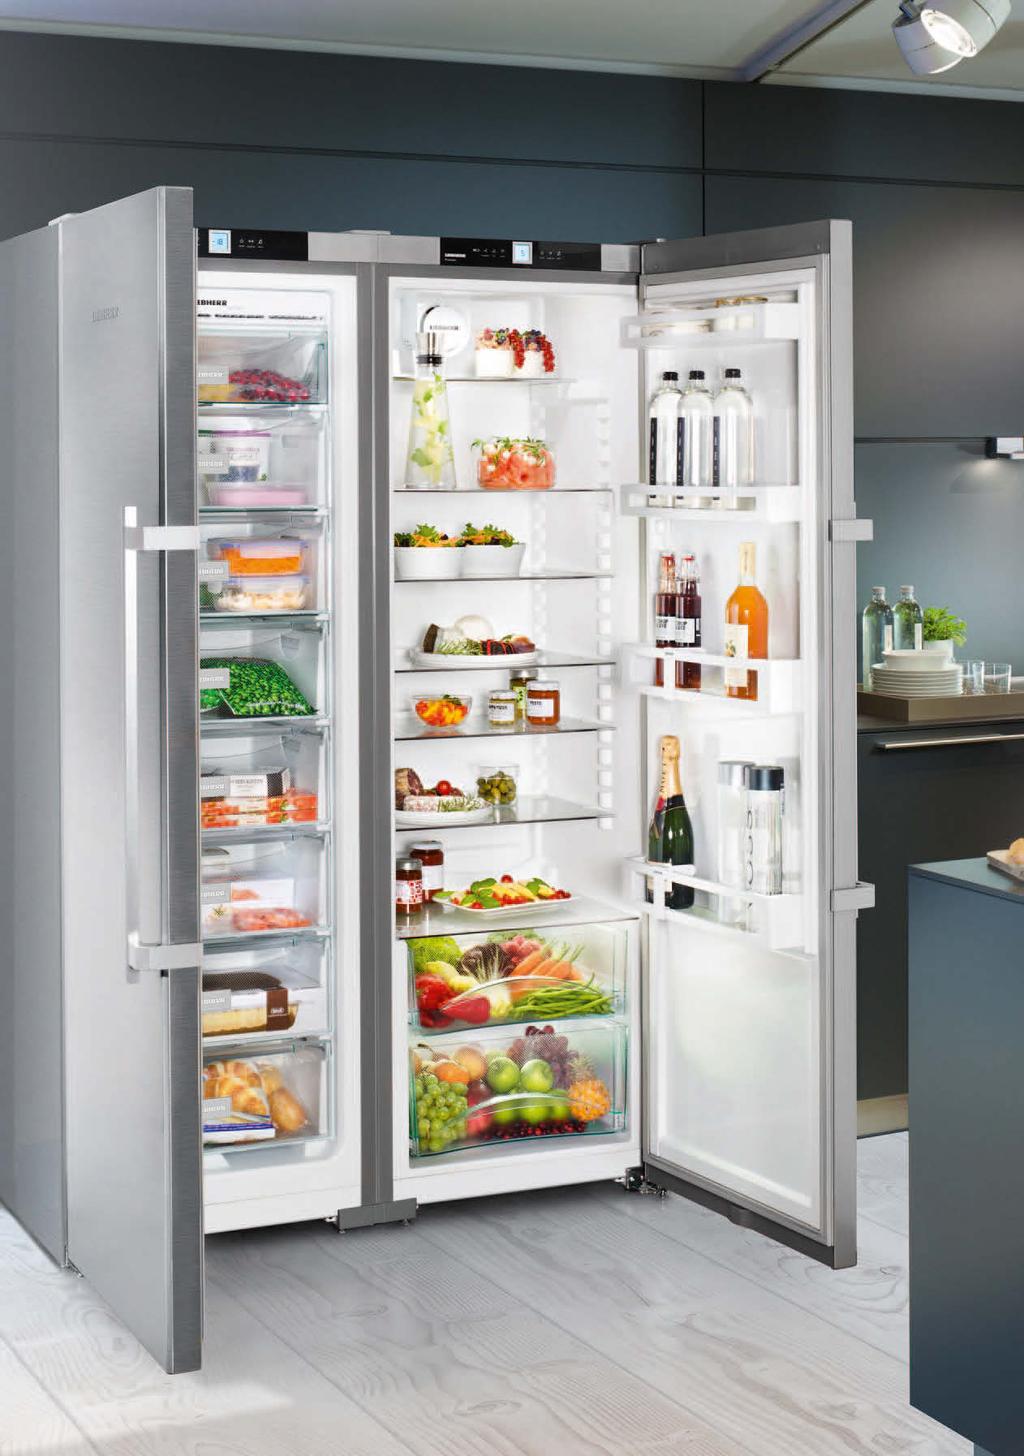 Side-by-Side fridge-freezer with two temperature zones: SBSef 7 With the eight drawer NoFrost freezer compartment, the Side-by-Side fridge-freezer SBSef 7 gives you an extra-large capacity for